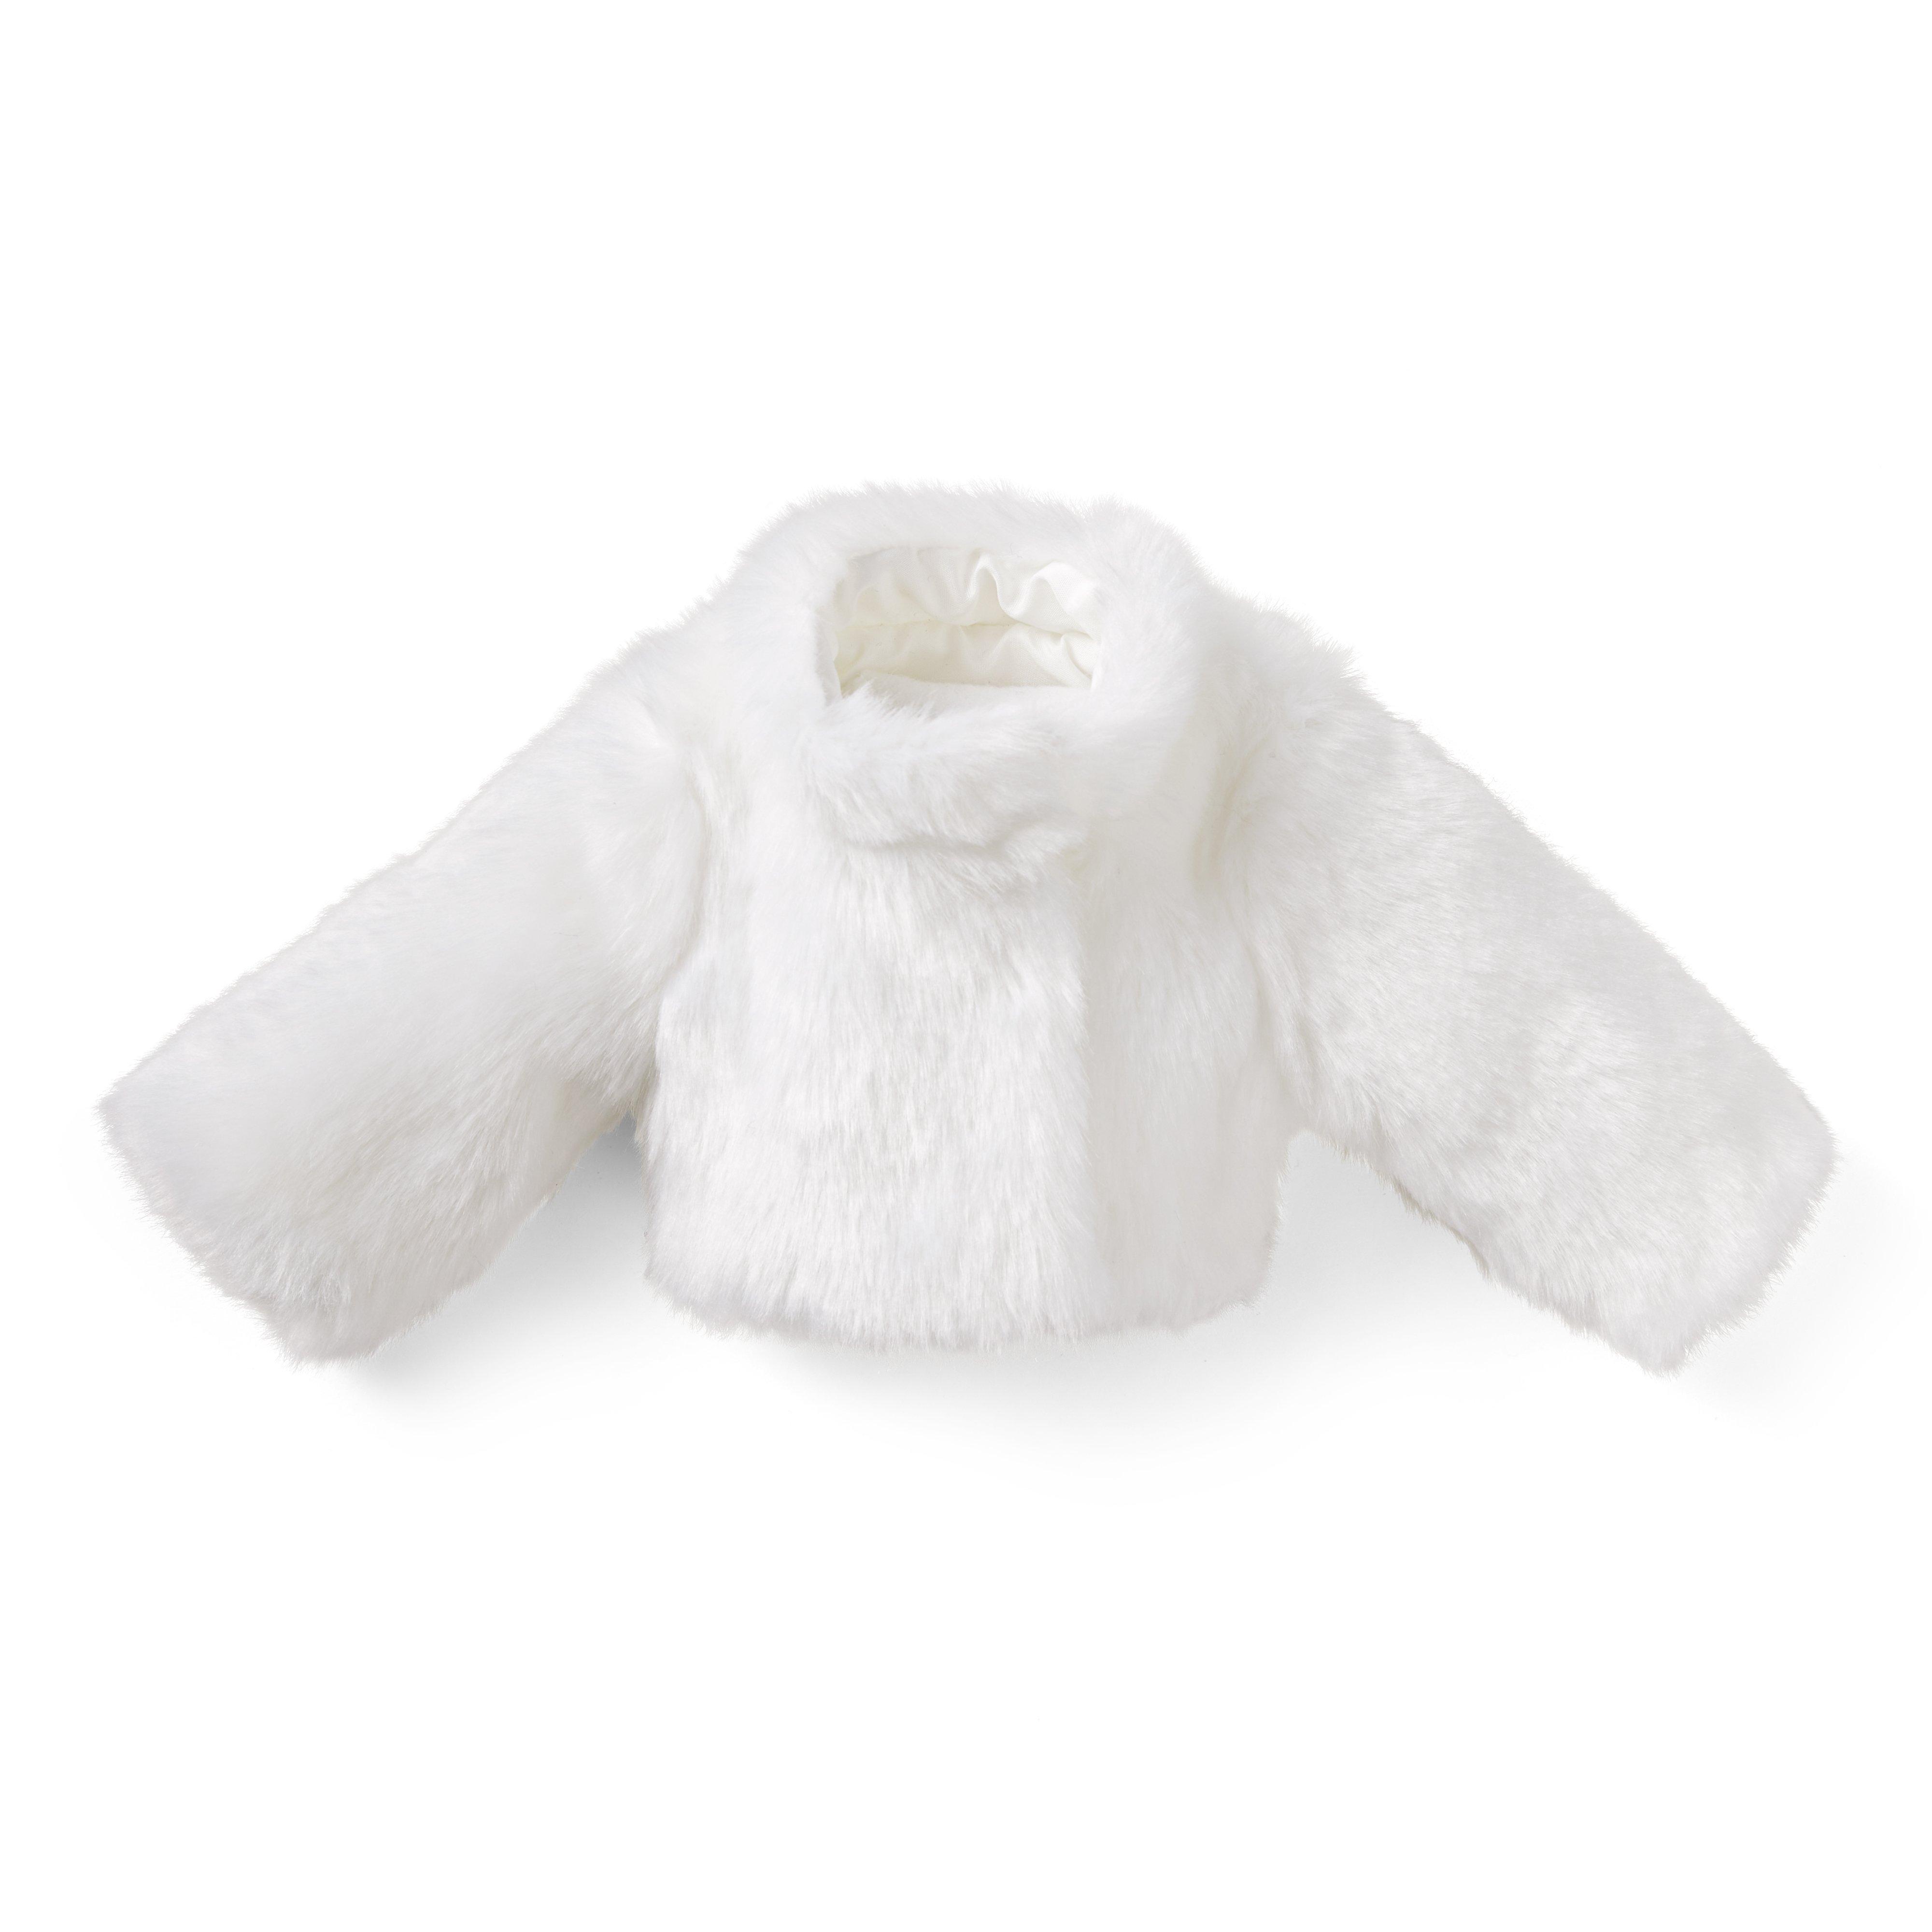 American Girl® x Janie and Jack Soft as Snow Fur Jacket For Dolls